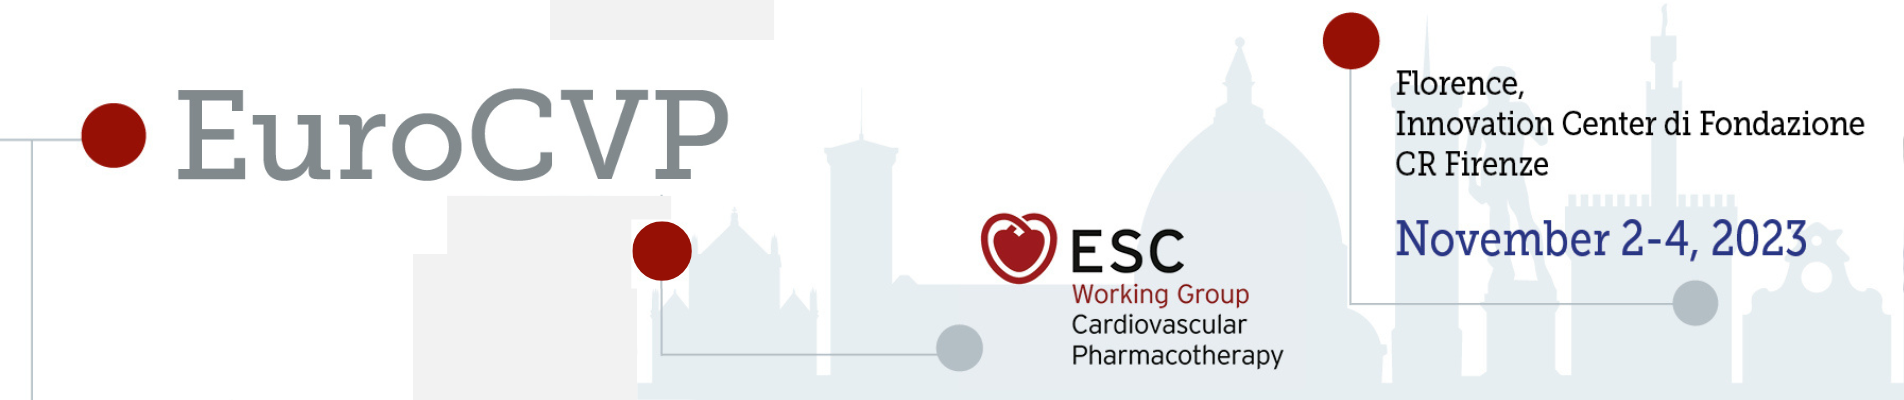 EuroCVP 2023 - The annual meeting on advances in cardiovascular pharmacotherapy